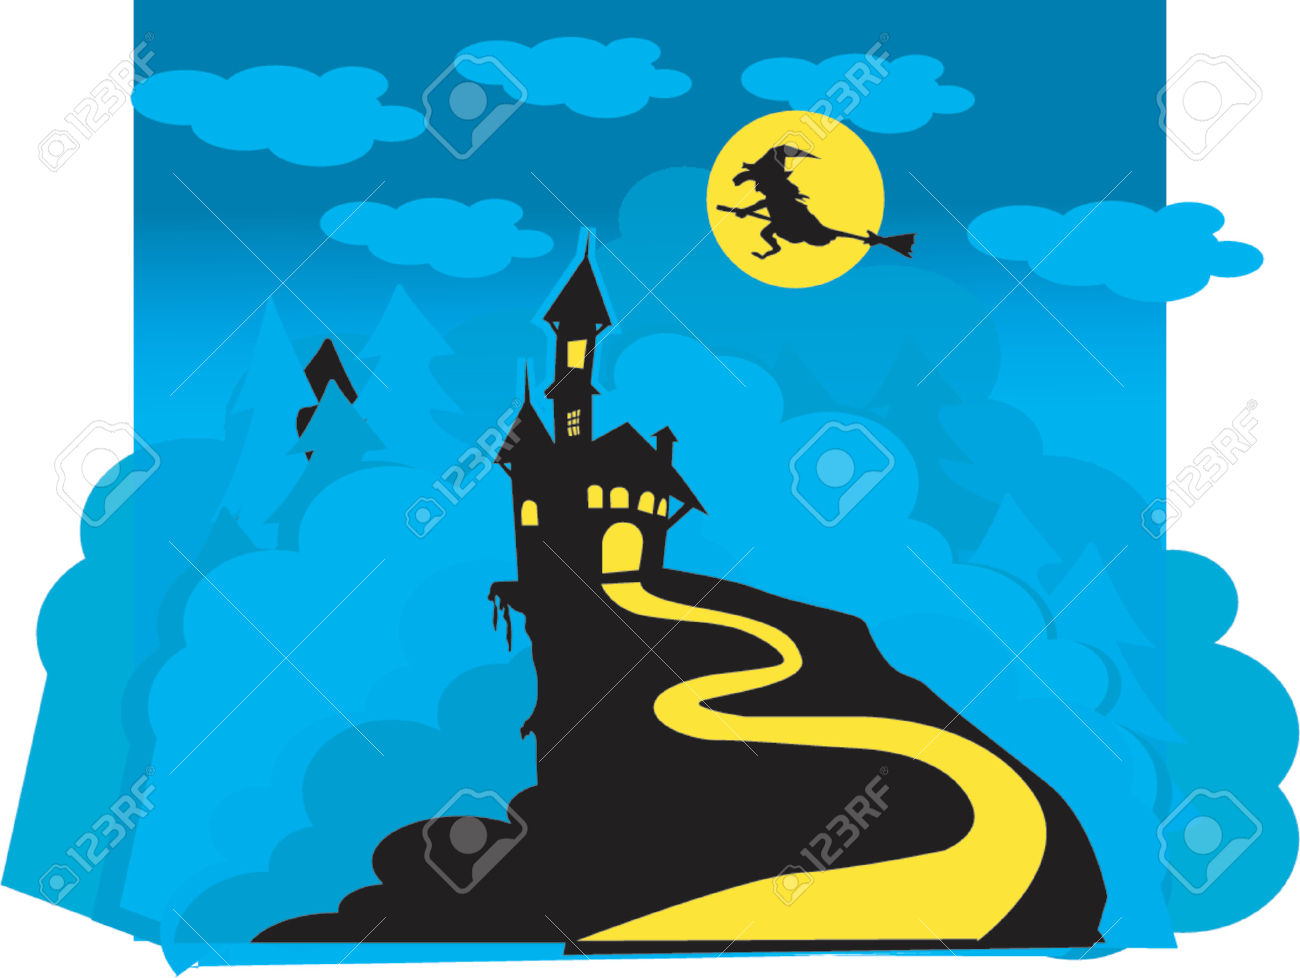 Dracula's Castle clipart #18, Download drawings